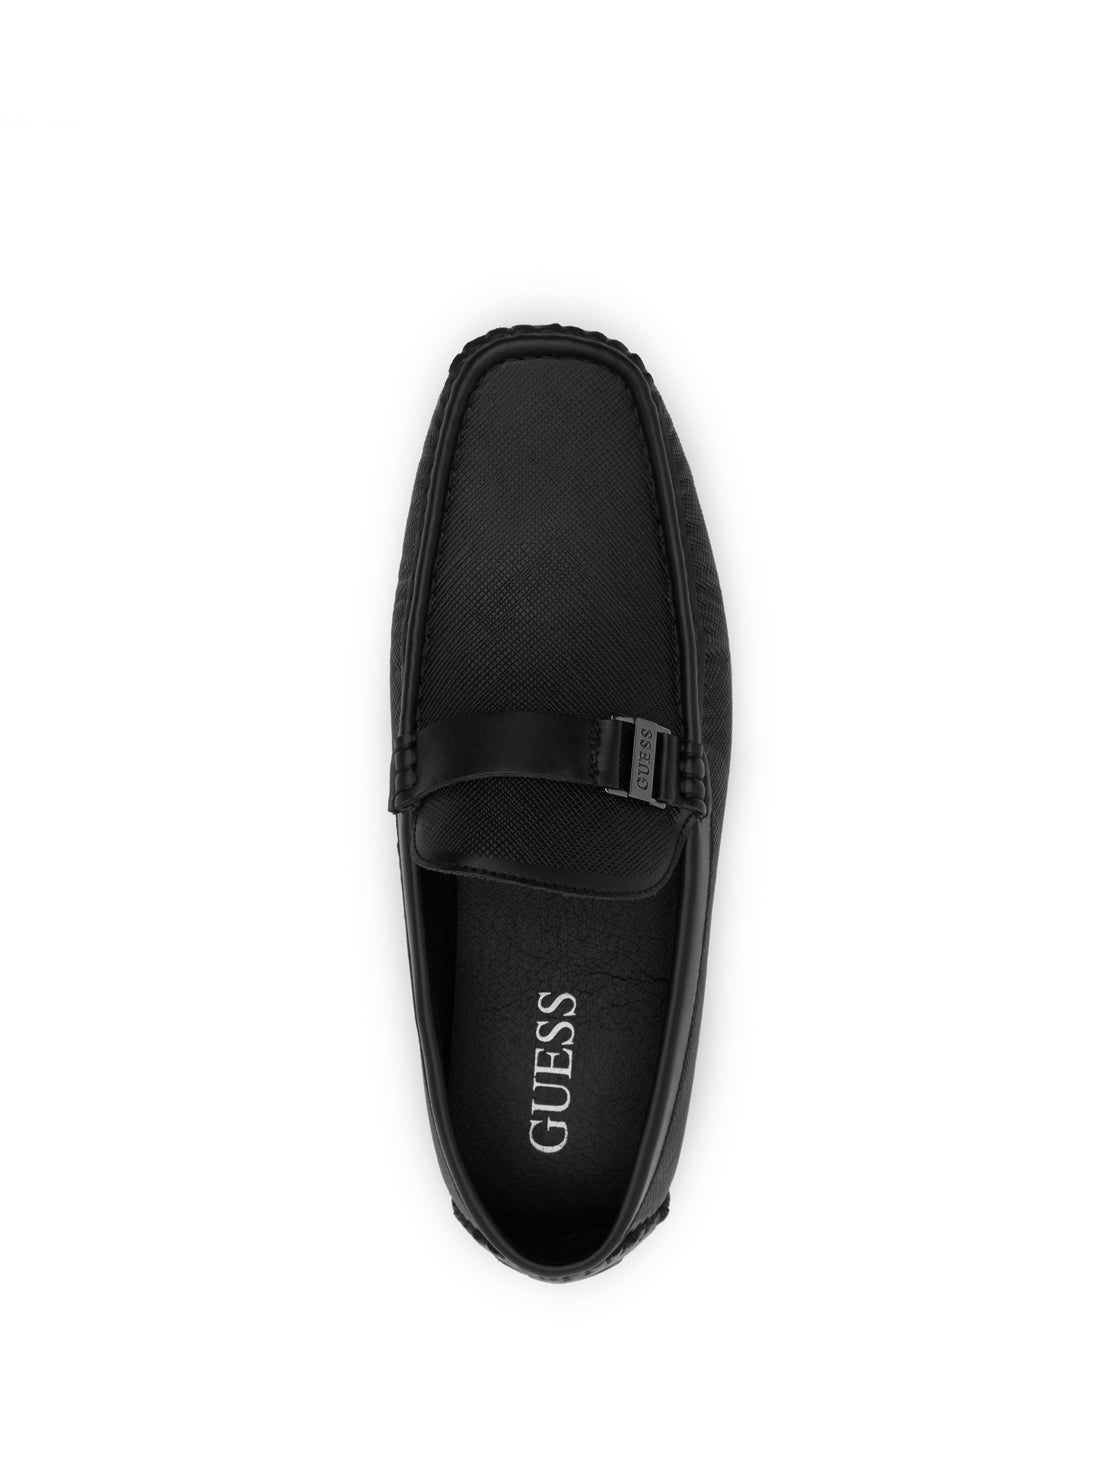 GUESS Men's Black Amadeo Loafers AMADEO2 Top View